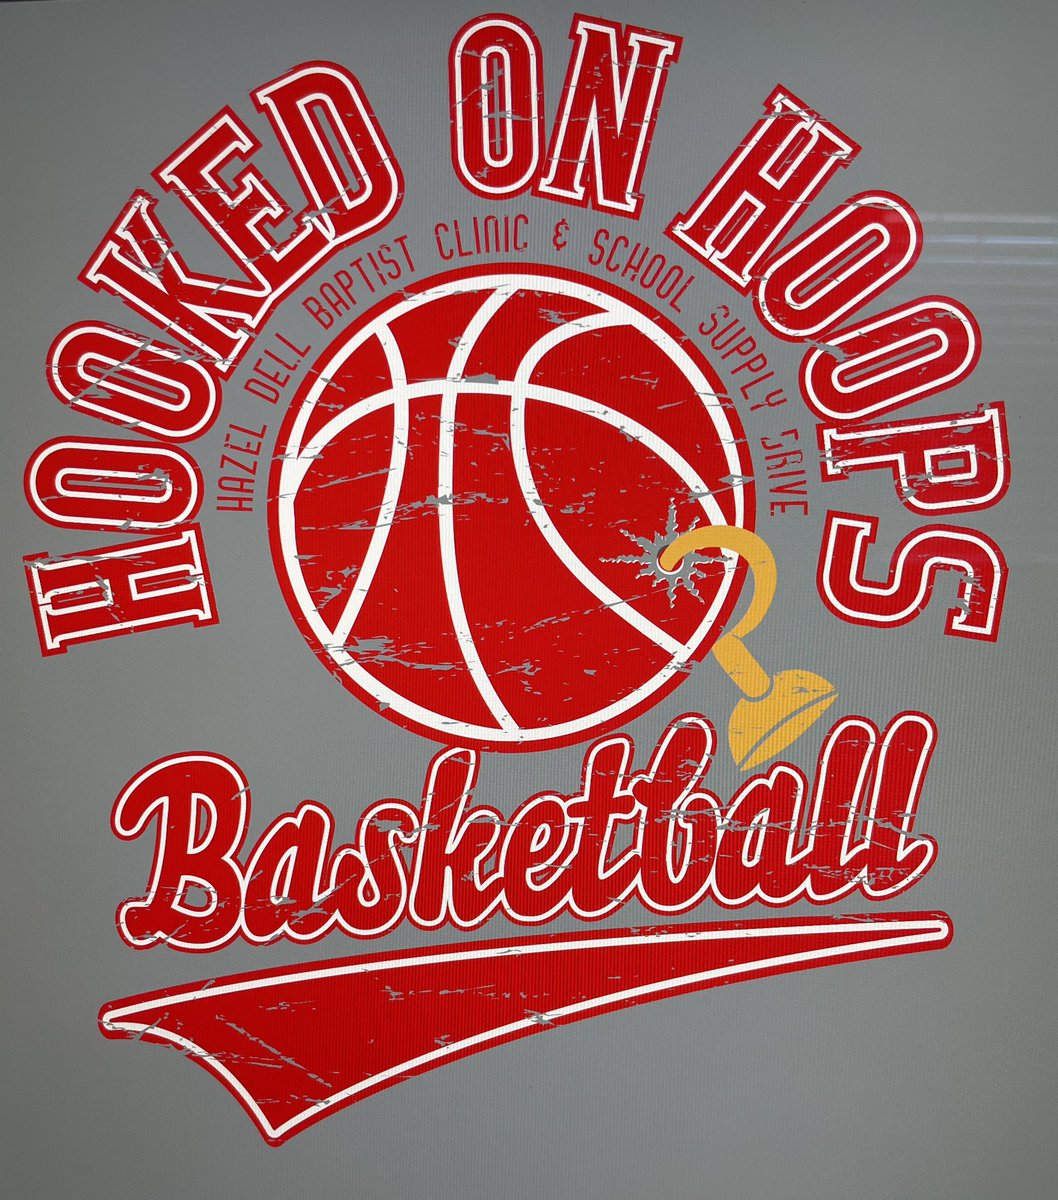 Last day to register for your guaranteed t-shirt at HOOKED ON HOOPS BASKETBALL CLINIC & SCHOOL SUPPLY DRIVE next Tuesday at Dale! #hookedonhoops #schoolsupply #basketball #MockShirtDesign 

Register here: 
docs.google.com/forms/d/e/1FAI…